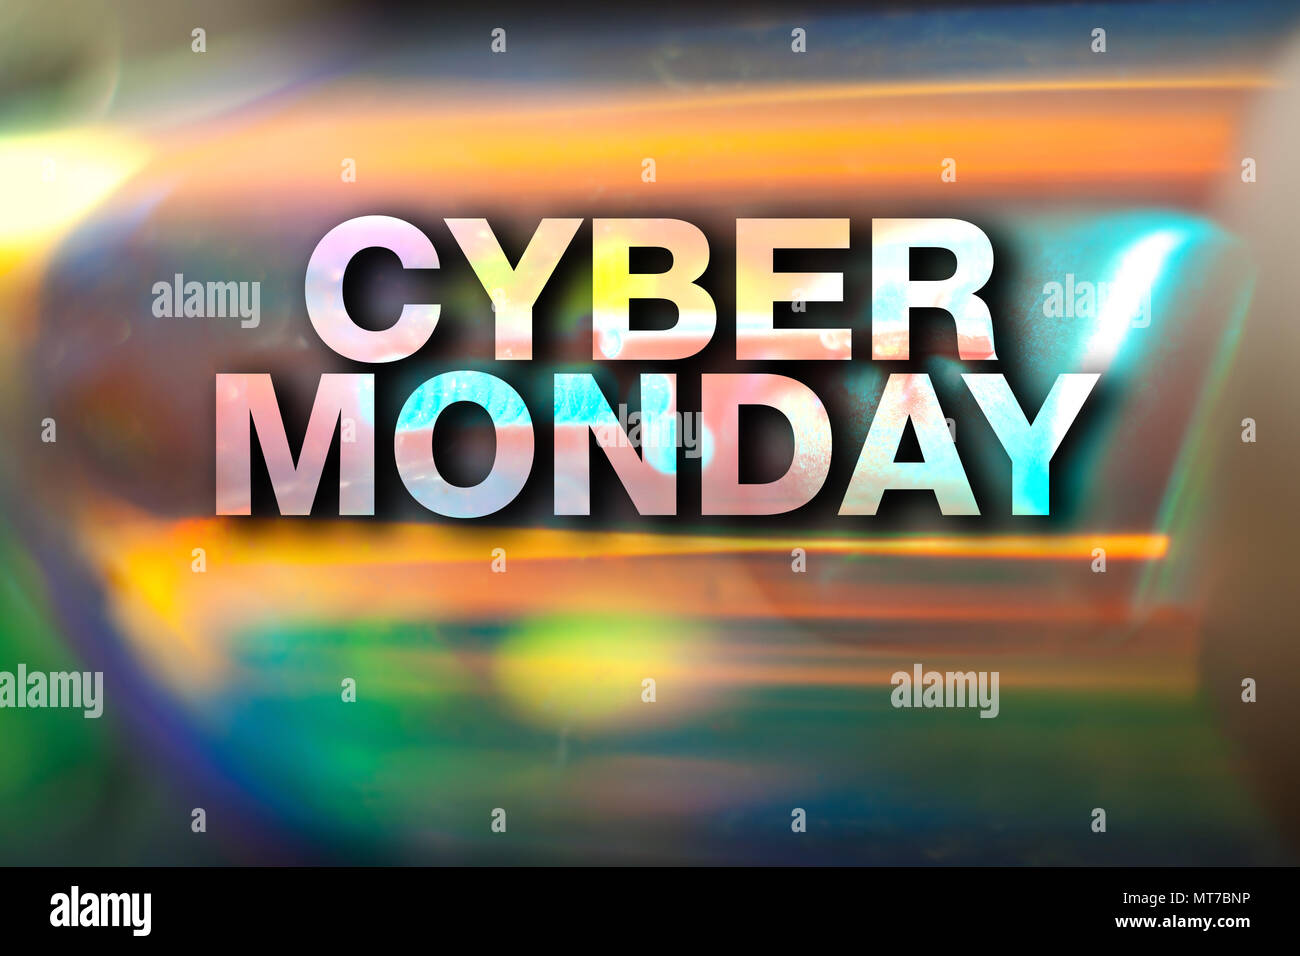 Cyber monday sale poster. Colorful abstract background Stock Photo